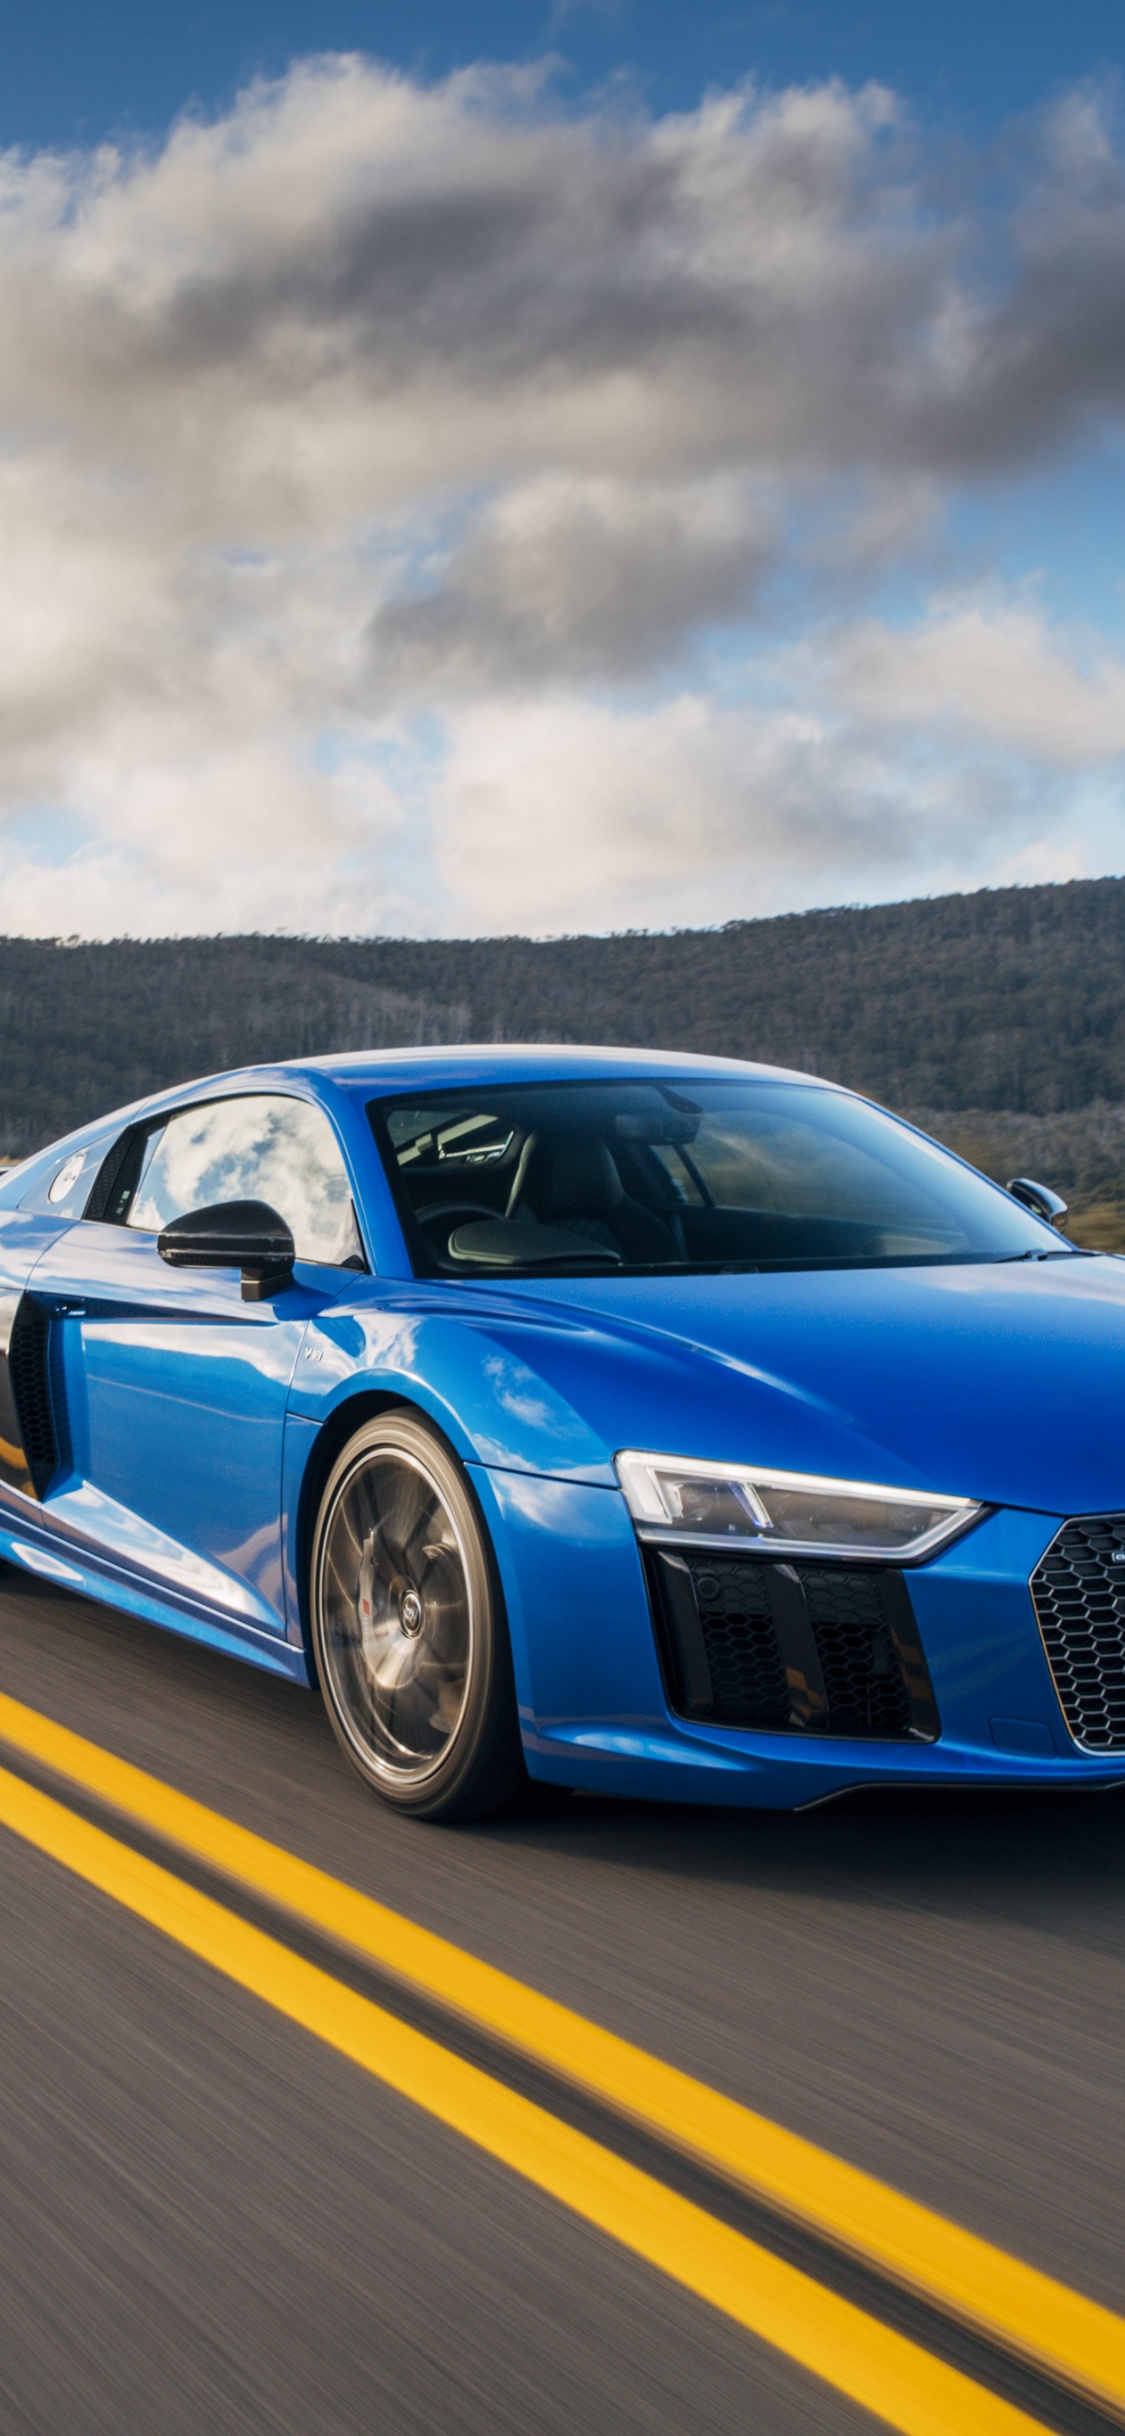 Blue Audi Coupe on Road During Daytime. Wallpaper in 1125x2436 Resolution